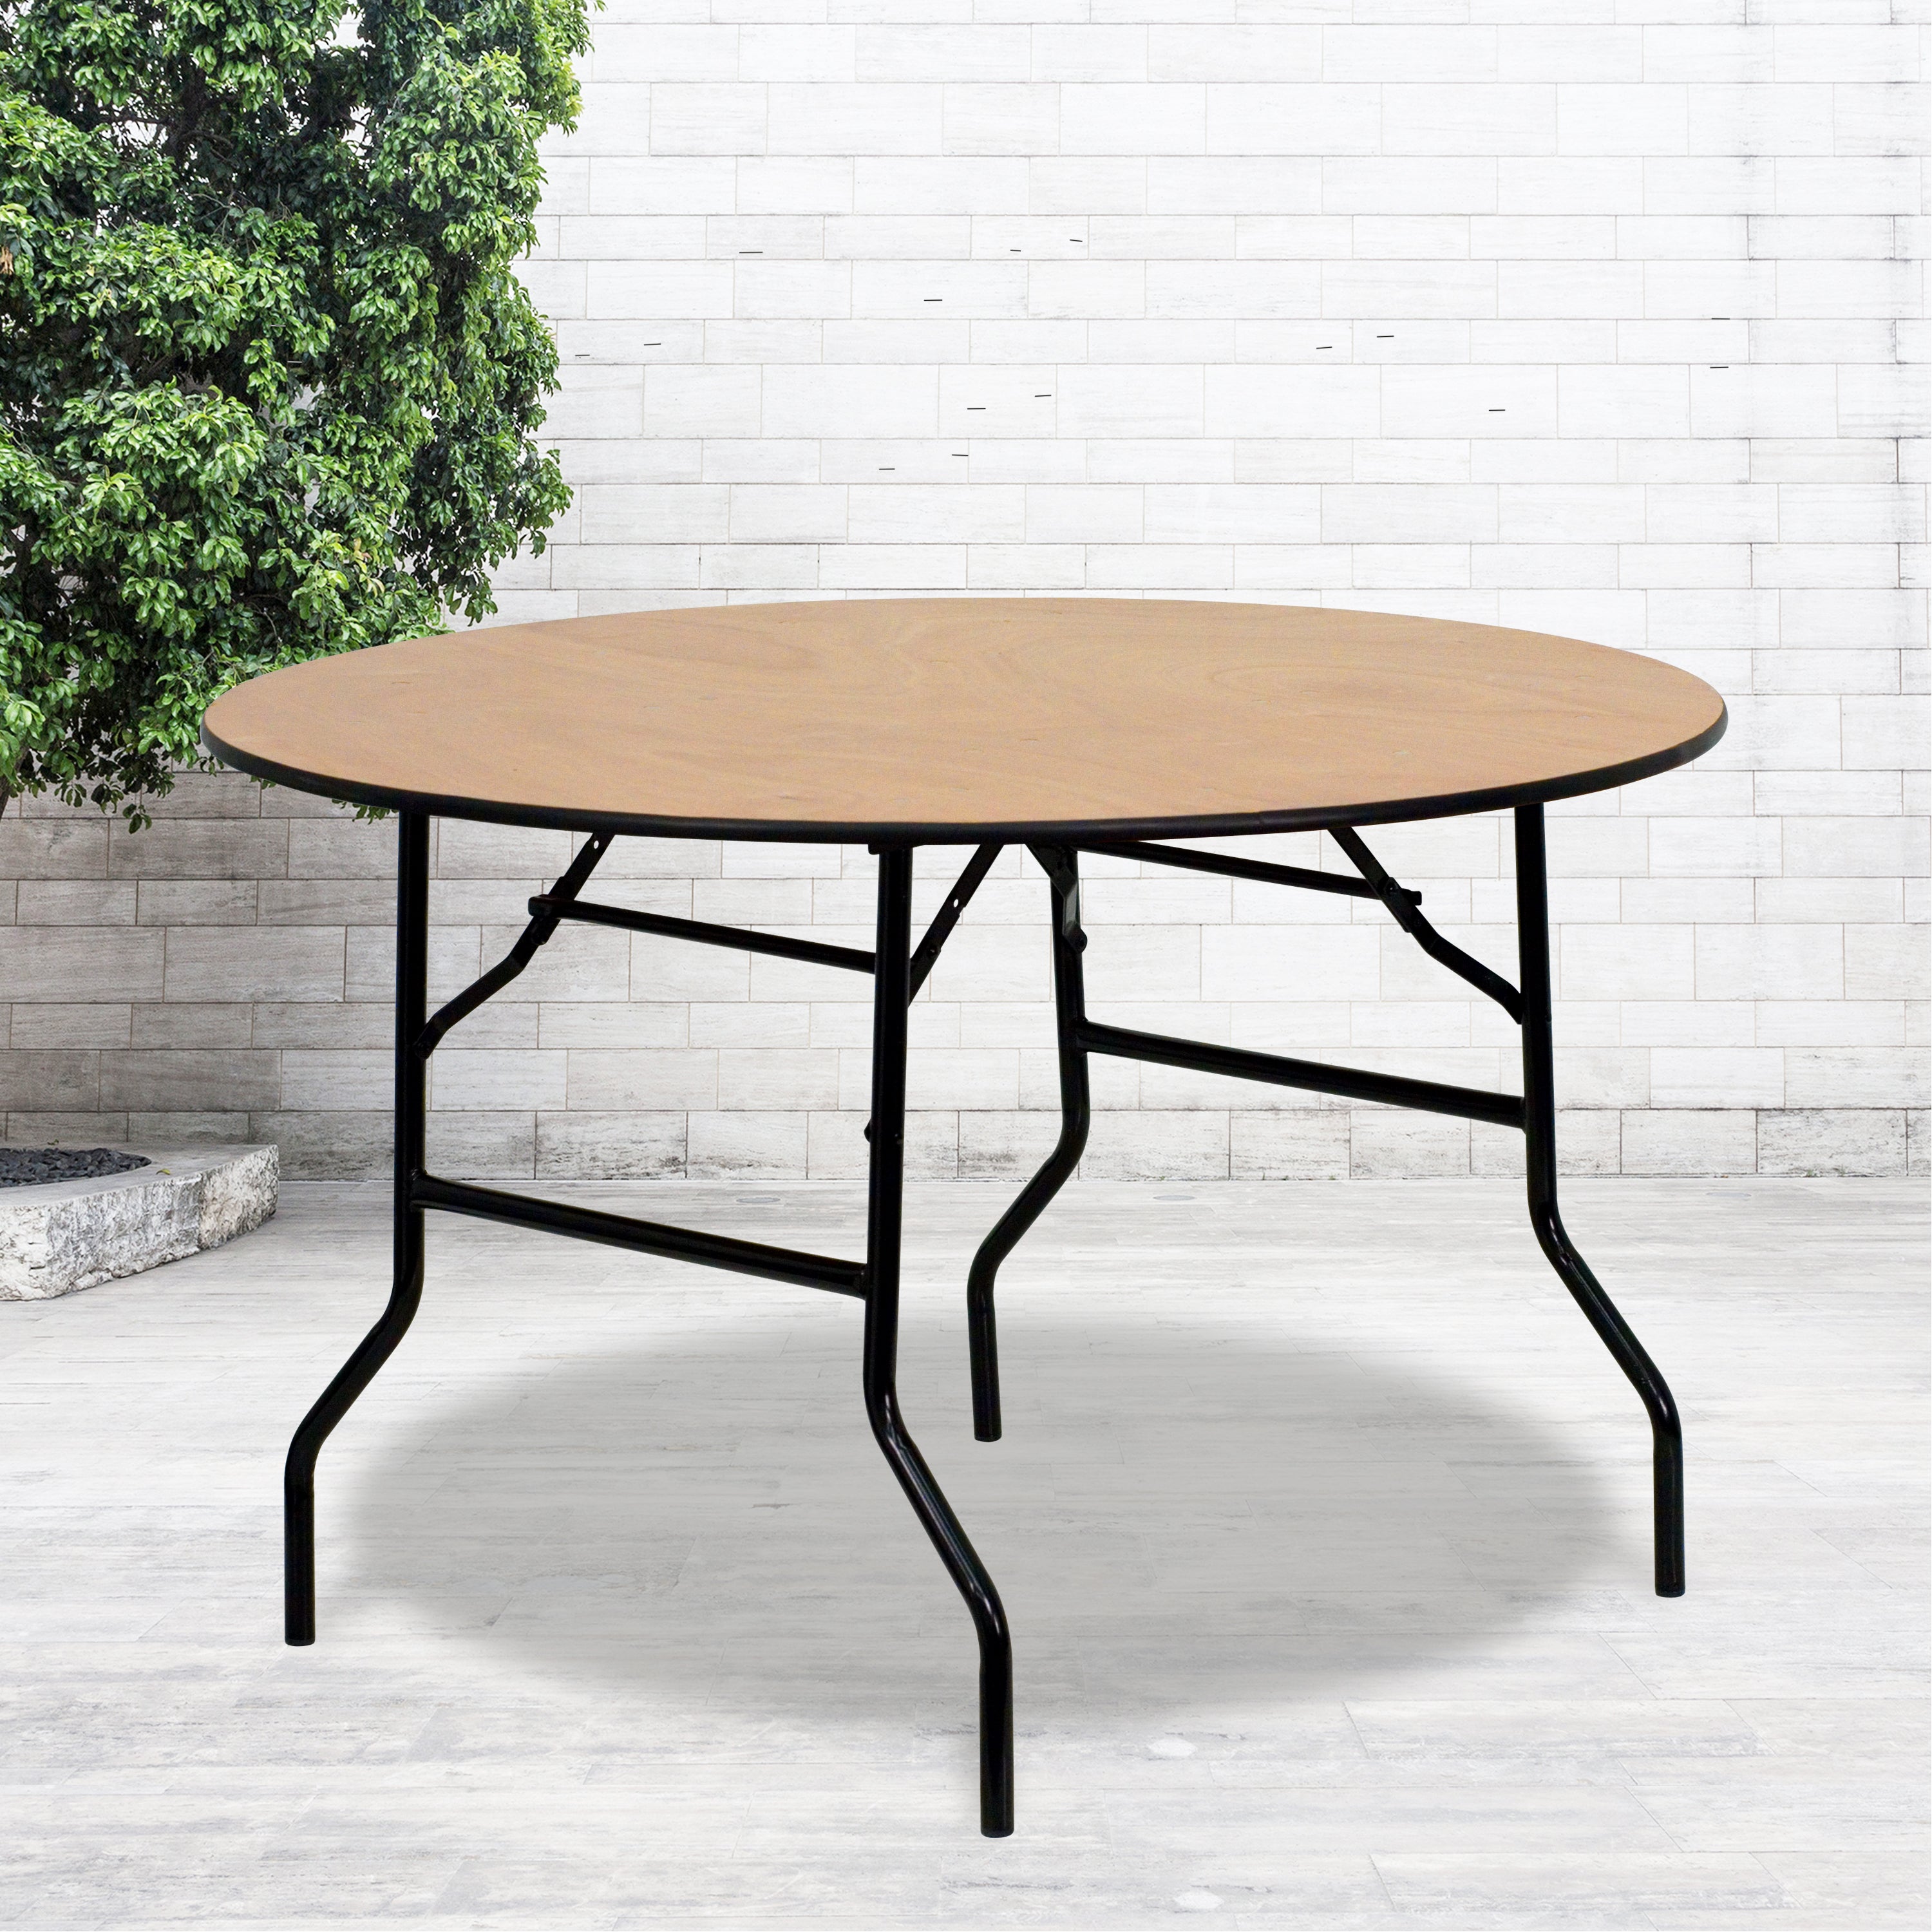 4-Foot Round Wood Folding Banquet Table with Clear Coated Finished Top-Round Folding Table-Flash Furniture-Wall2Wall Furnishings